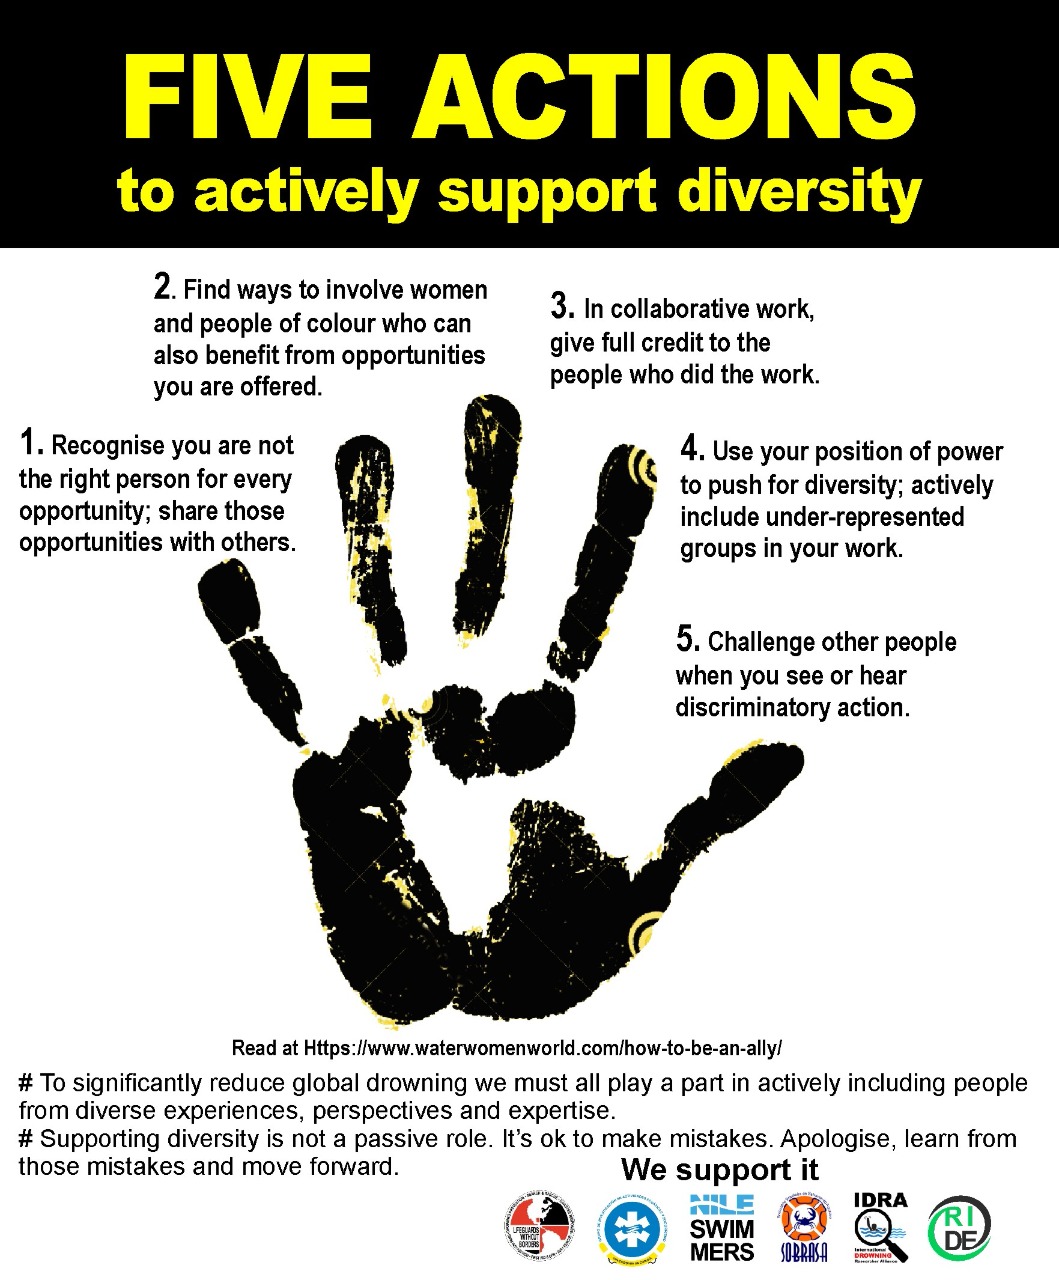 In my personal work and that of my organisation, I will actively support diversity by: 1. Recognising I am not the right person for every opportunity and sharing those opportunities with others. 2. Finding ways to involve women and people of colour who can also benefit from opportunities I am offered. 3. In collaborative work, giving full credit to the people who did the work. 4. Using my position of power to push for diversity and actively including under-represented groups in my work. 5. Challenging other people when I see or hear discriminatory action.